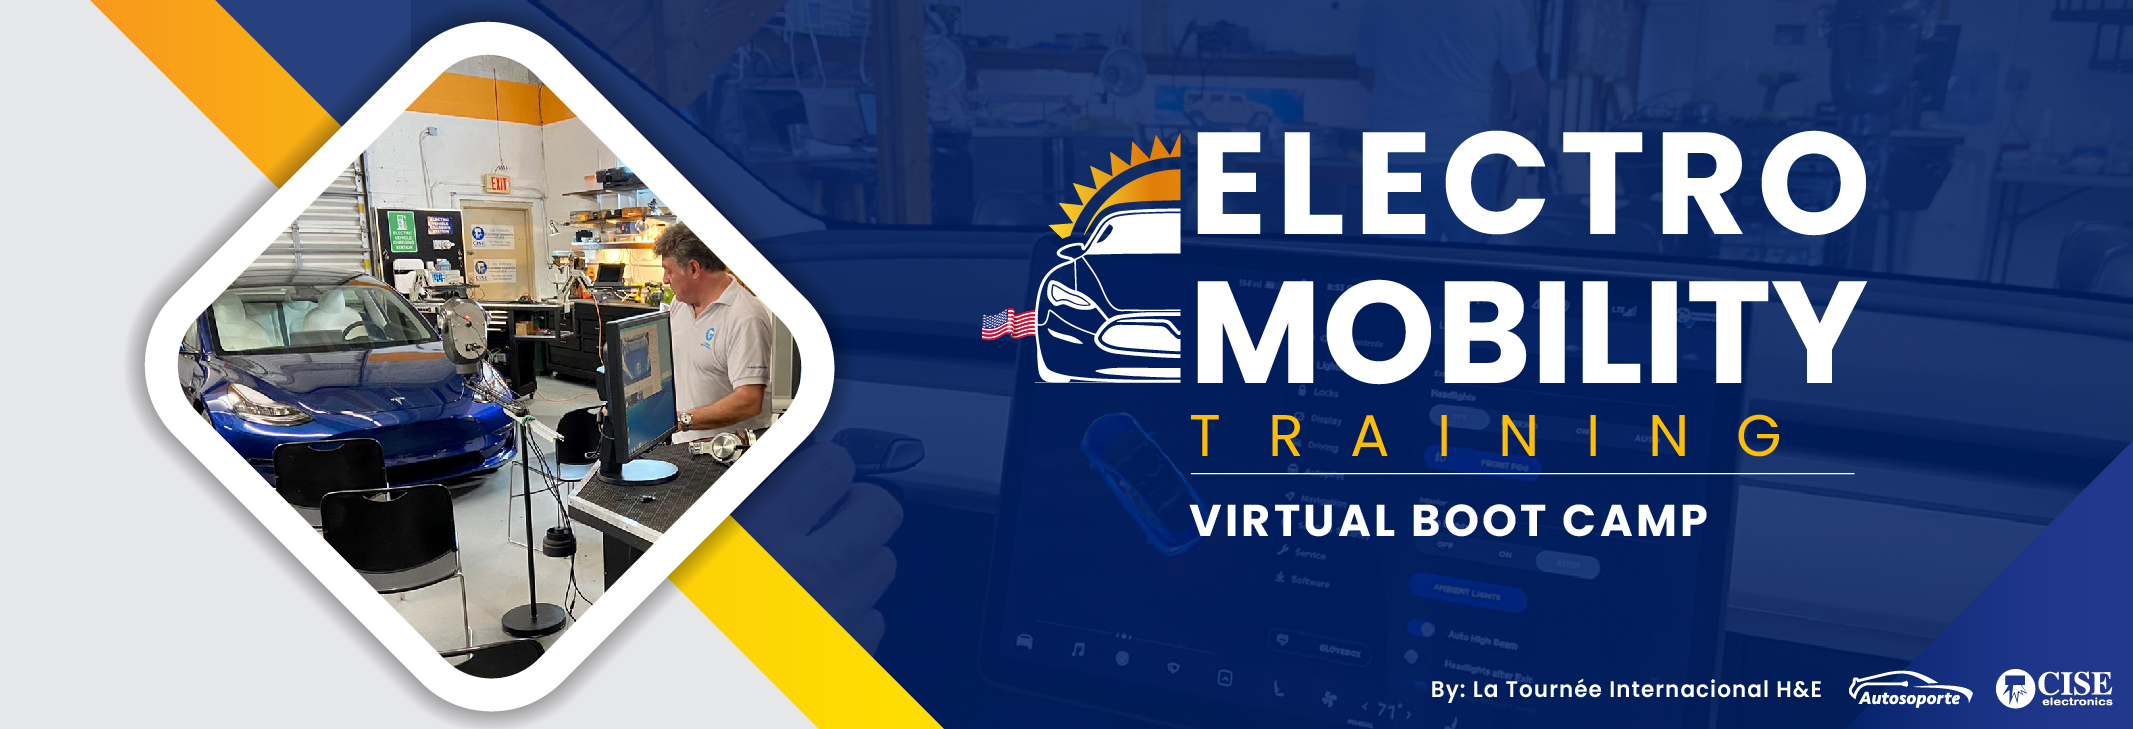 5 version banners Electromobility Training Virtual Boot Camp SIN FECHAS banner interno copia 4